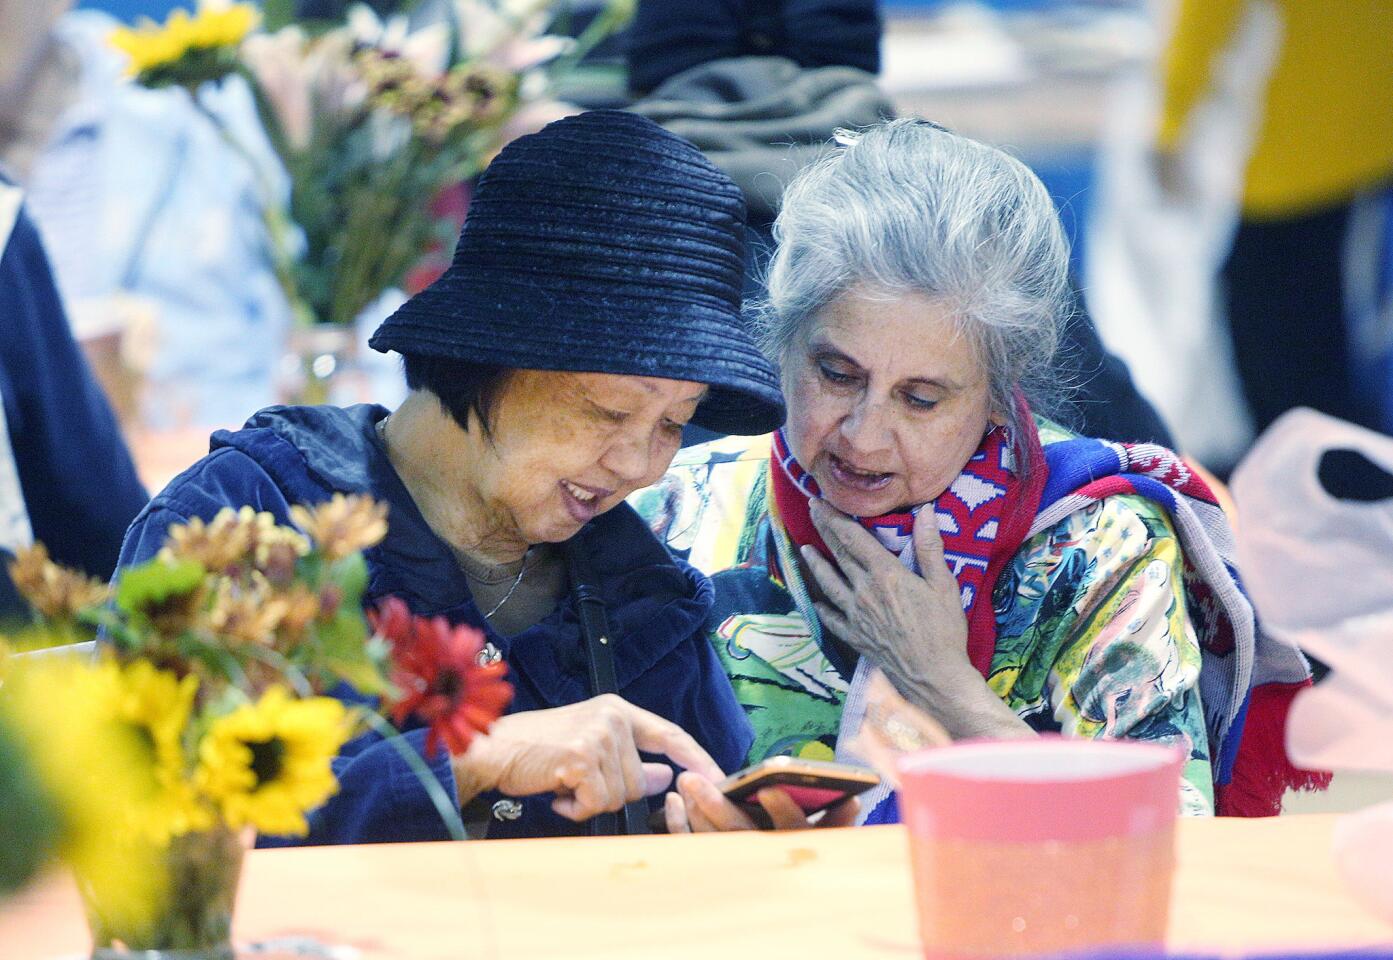 Linda Lin, of Glendale, shows Anita Black, of Glendale, her family photos on her cell phone at The Glendale Salvation Army for the annual Thanksgiving dinner on Tuesday, November 20, 2018. Black is a volunteer with a goal of meeting people, and was drawn to Lin who shared her family story with her.